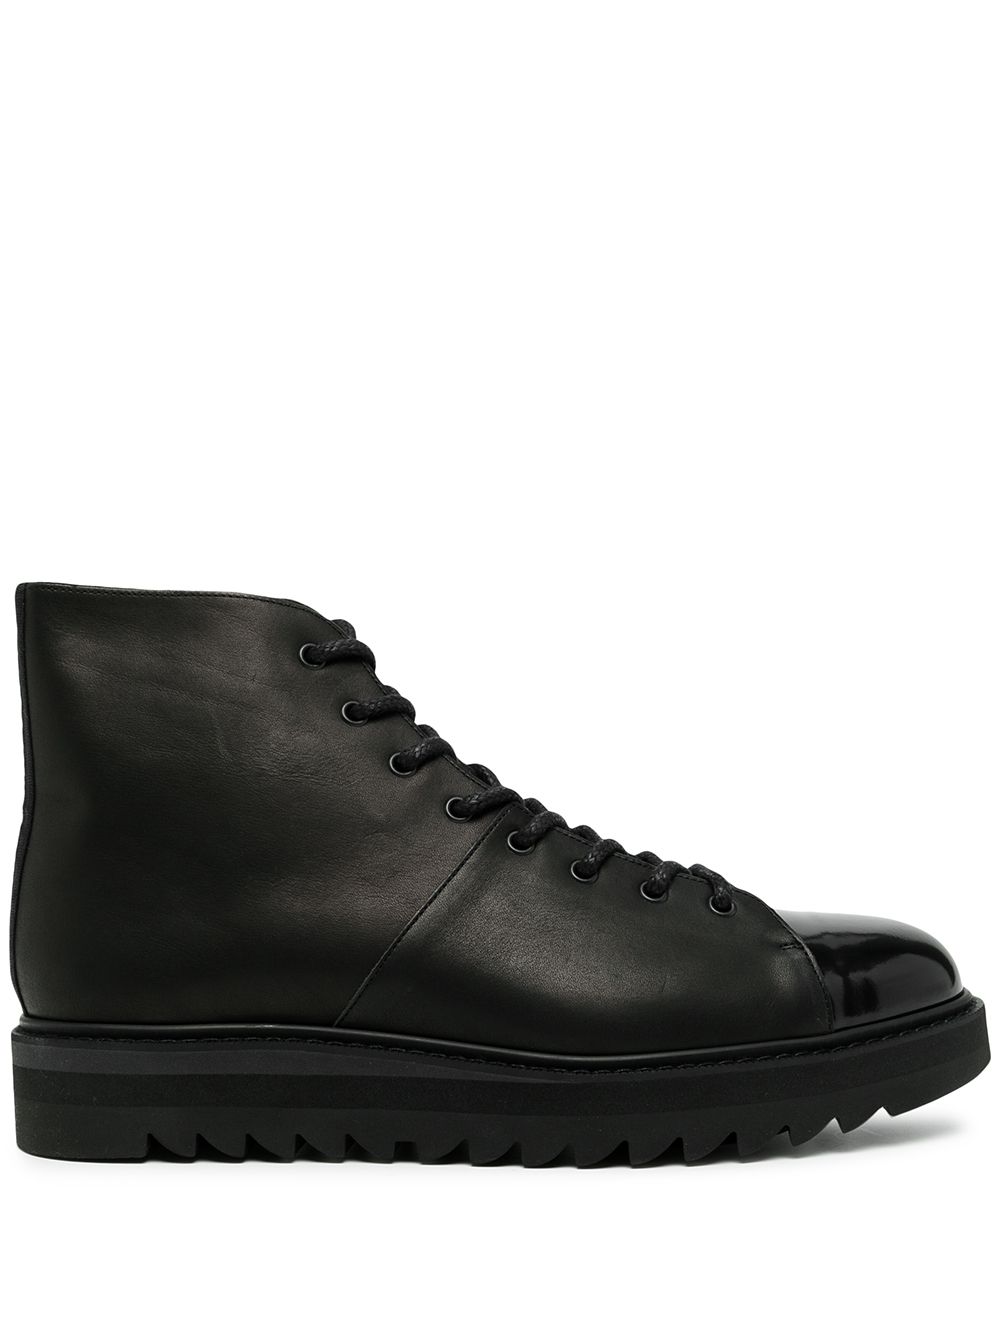 Onitsuka Tiger lace-up leather boots - Black von Onitsuka Tiger